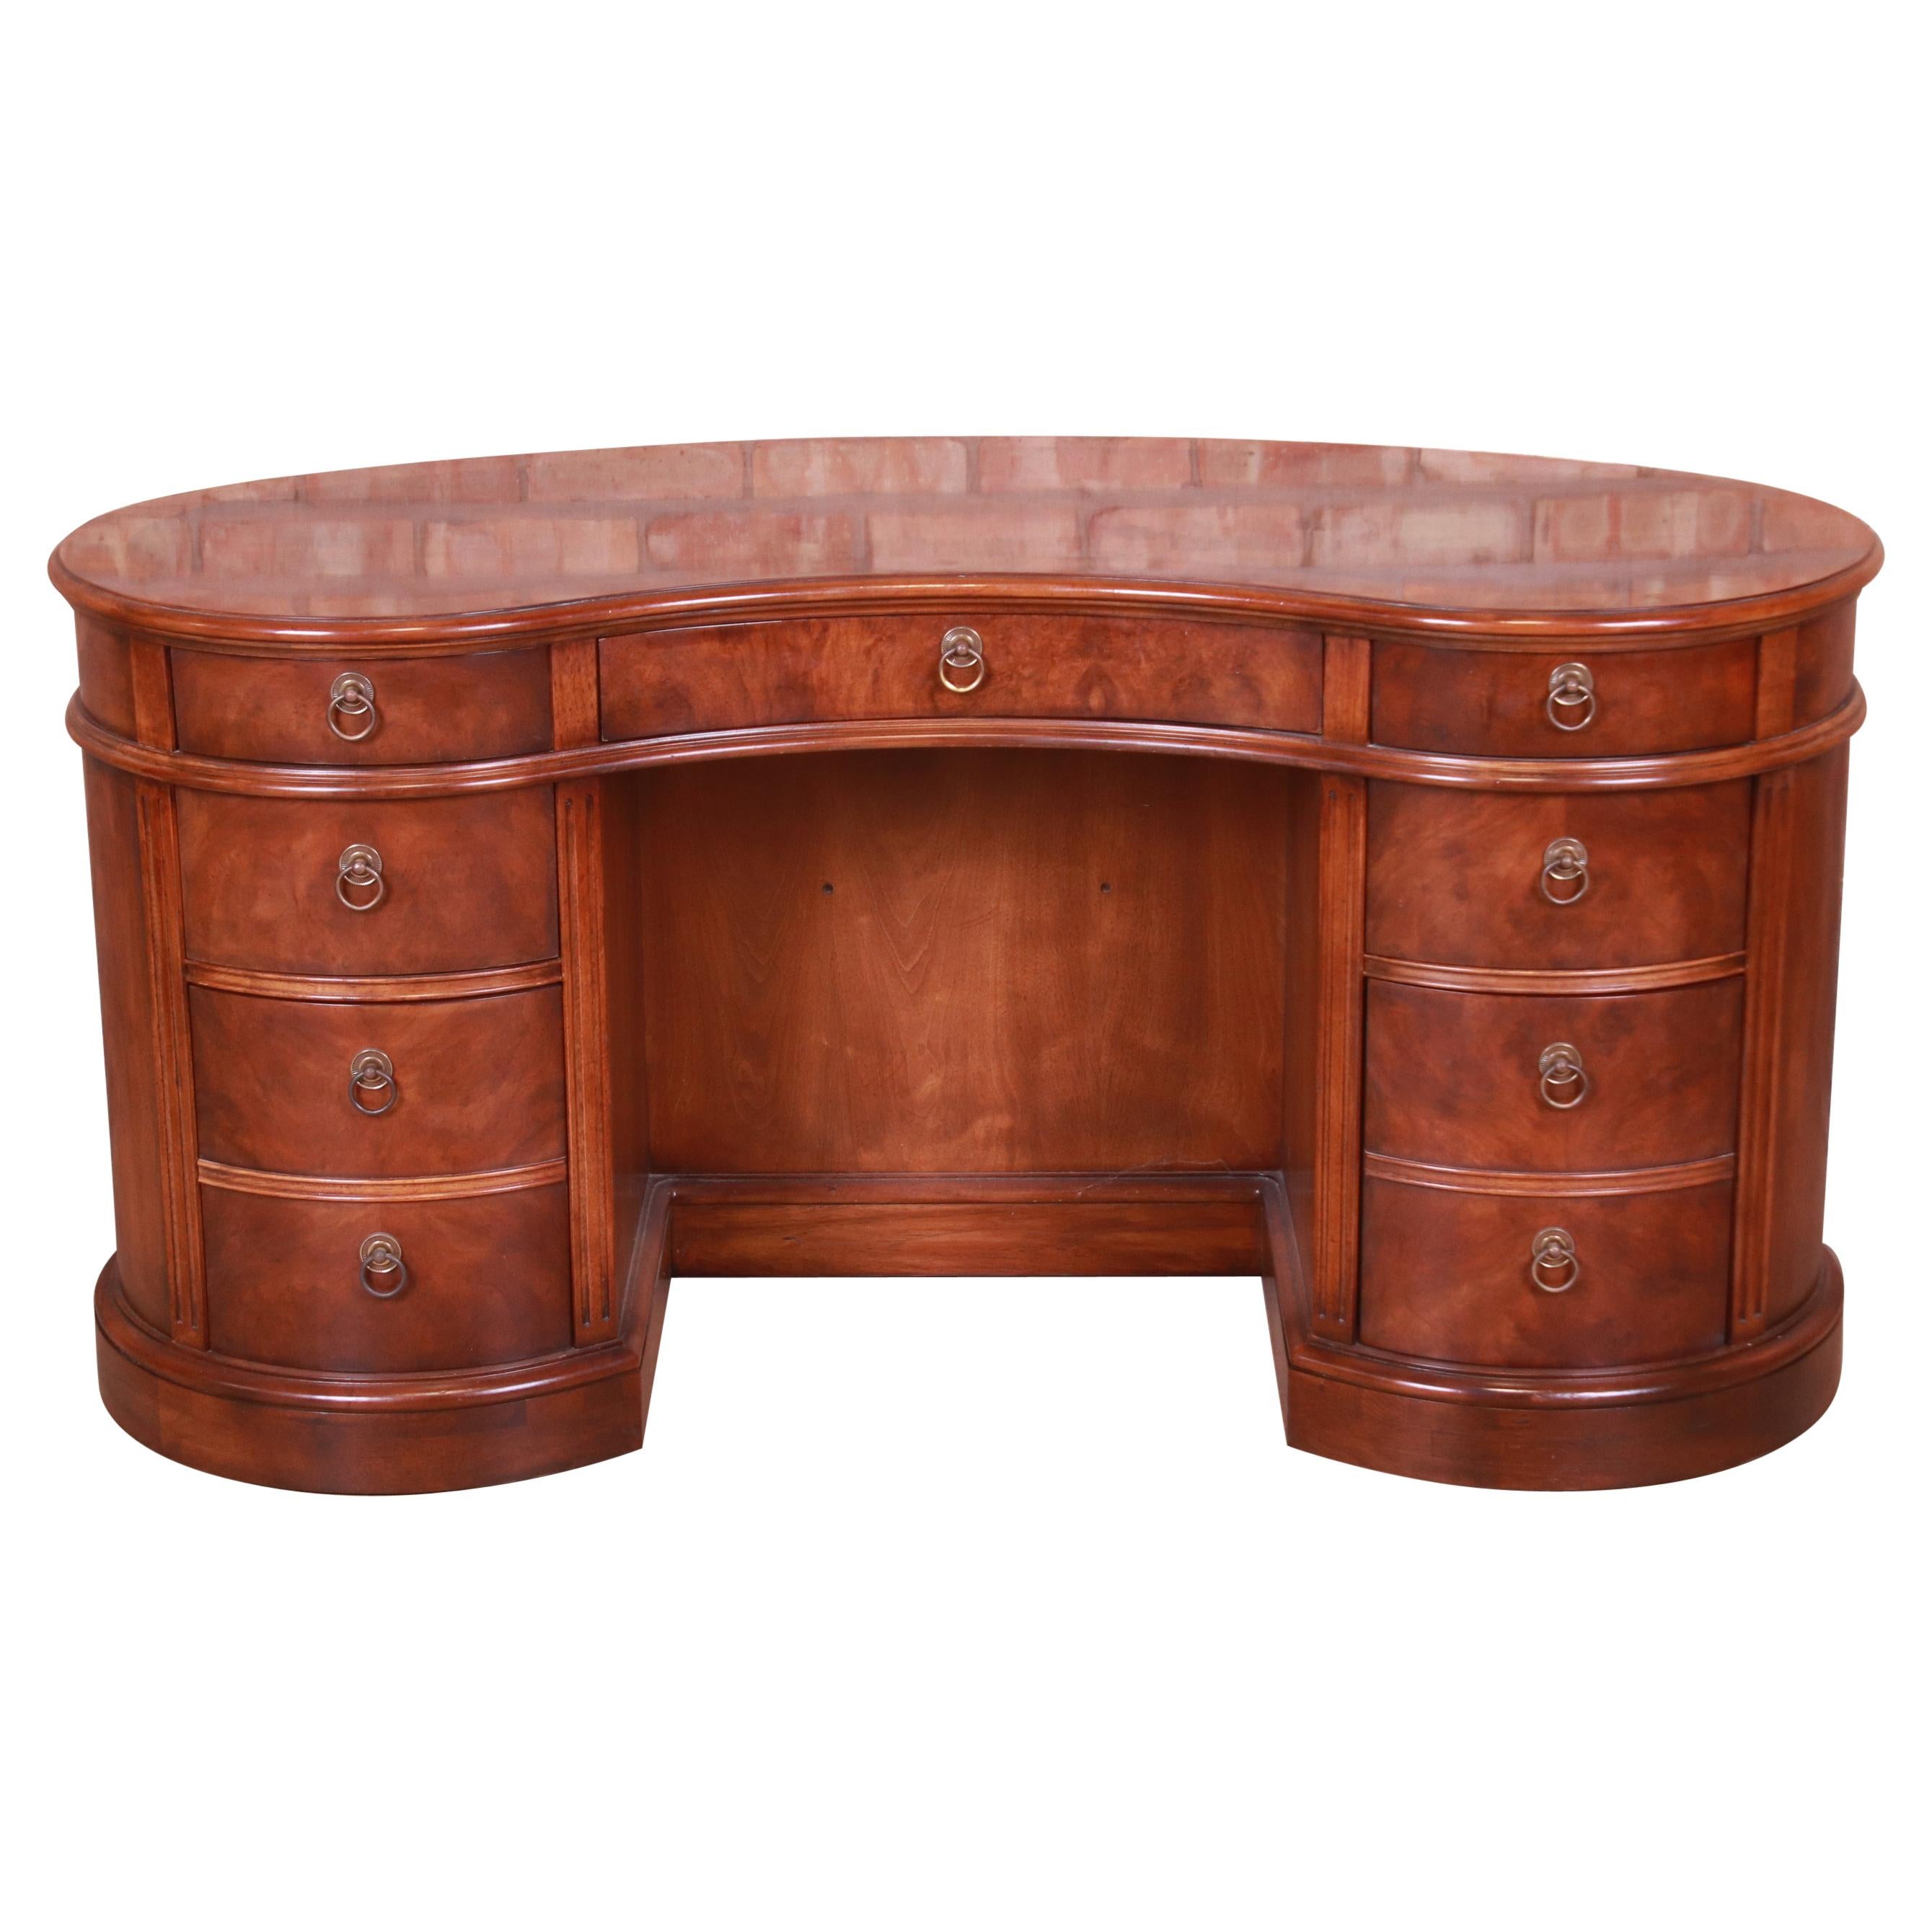 Drexel Heritage Mahogany and Burl Wood Kidney Shaped Desk with Bookcase